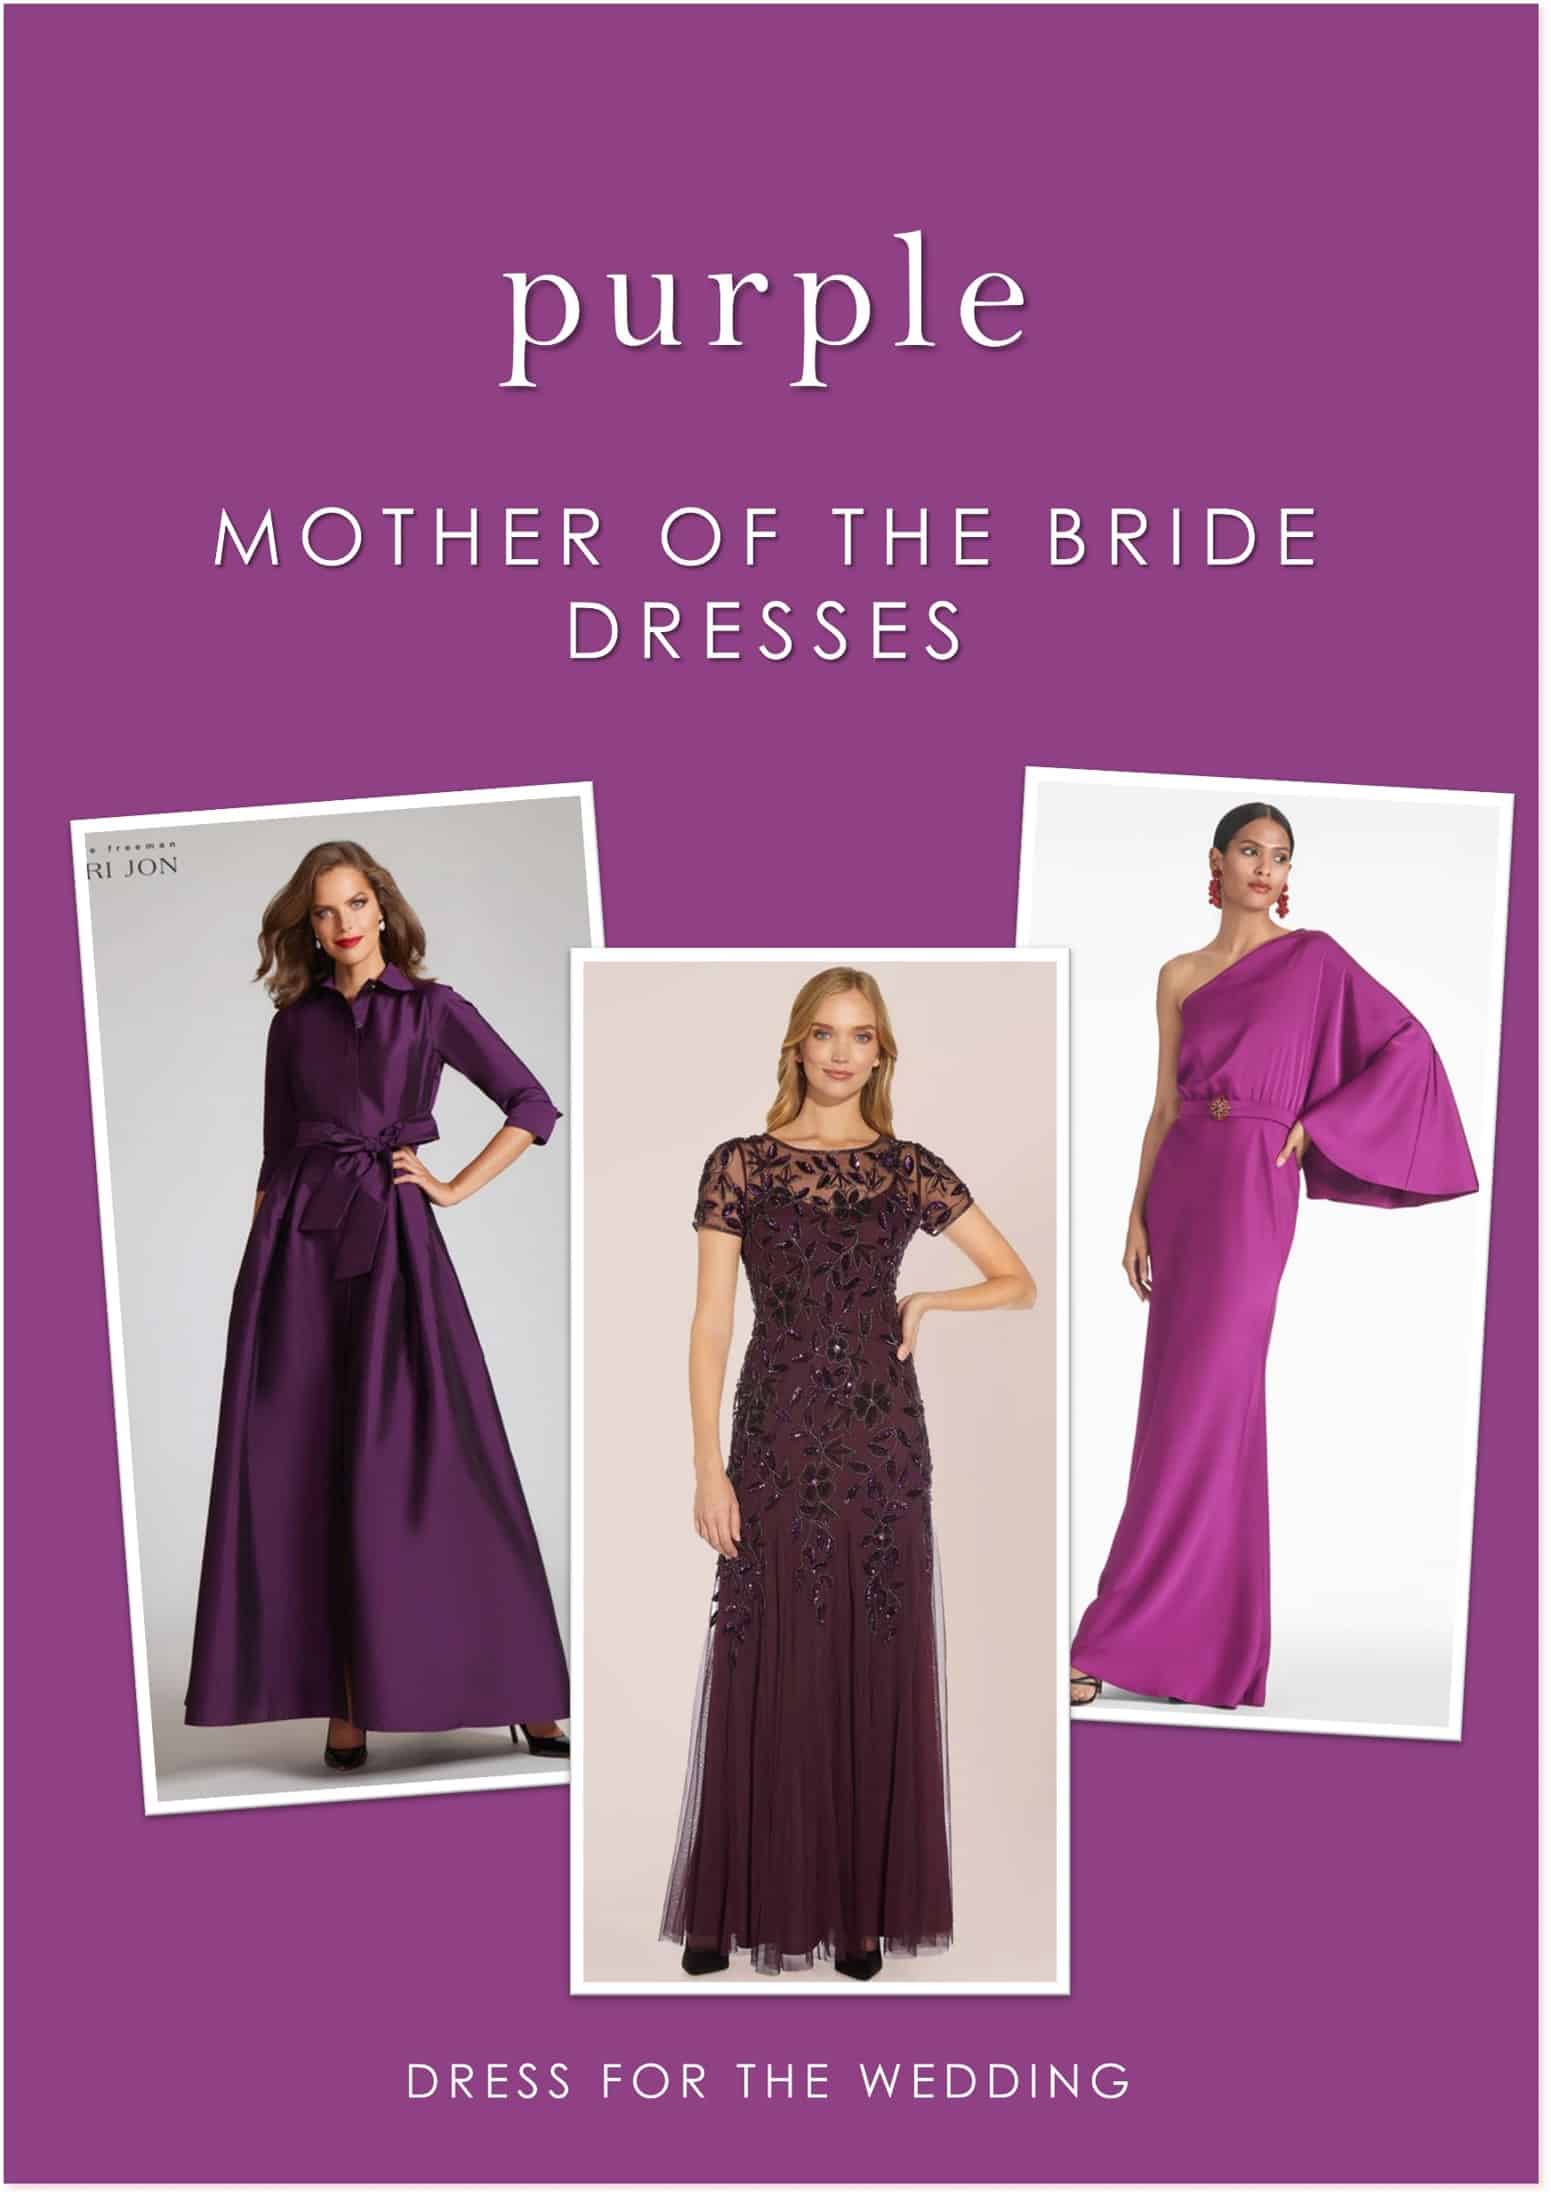 Purple Mother of the Bride Dresses - Dress for the Wedding